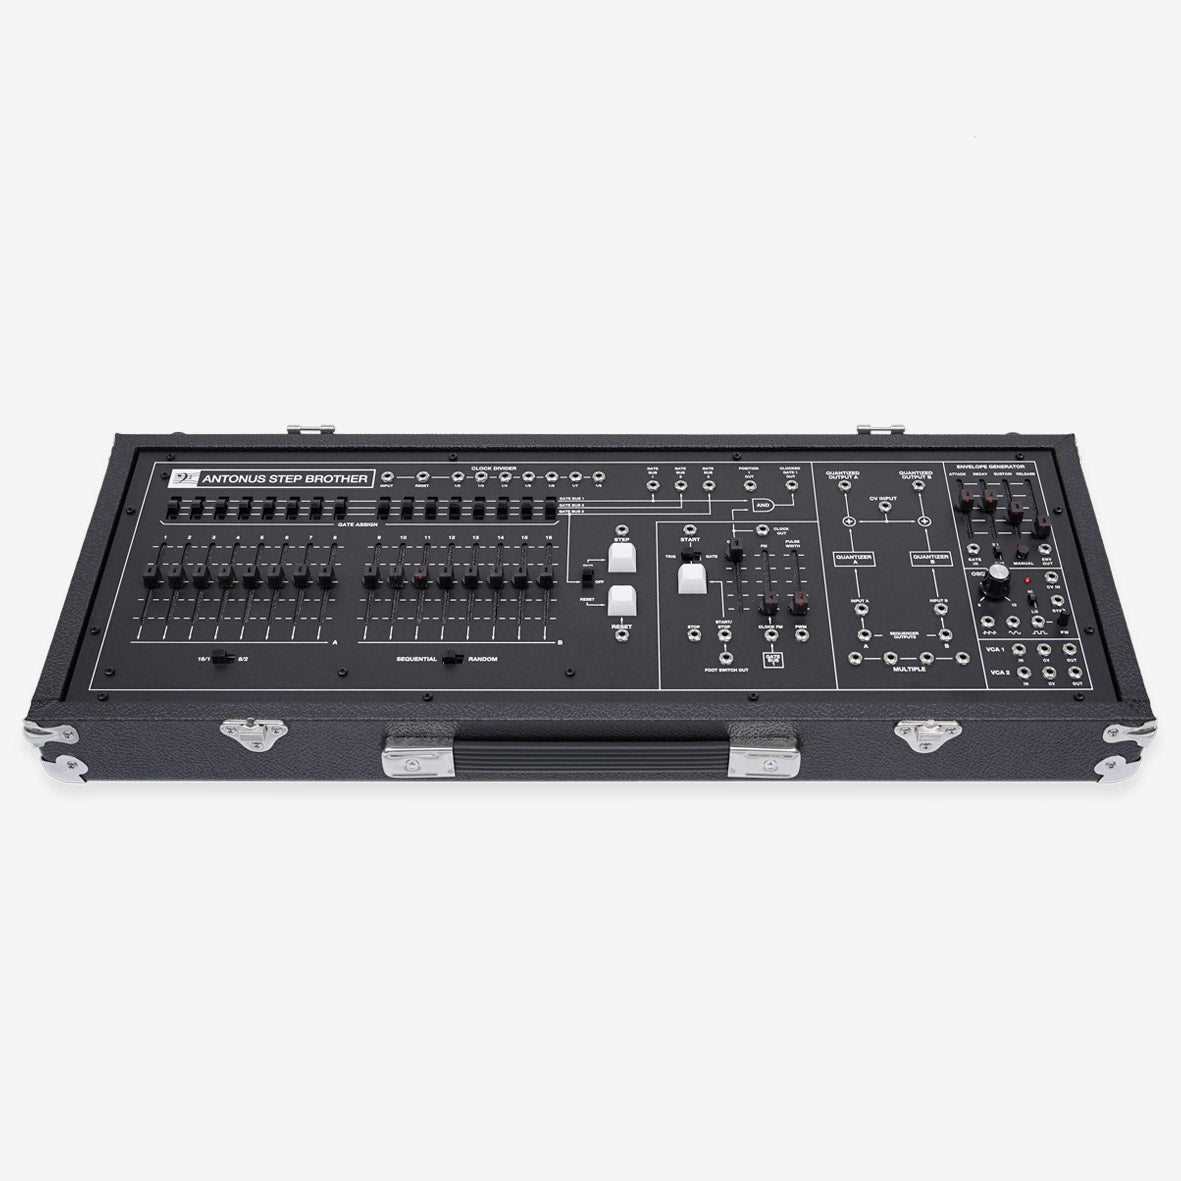 Pre-Order for Antonus Step Brother Analog Sequencer